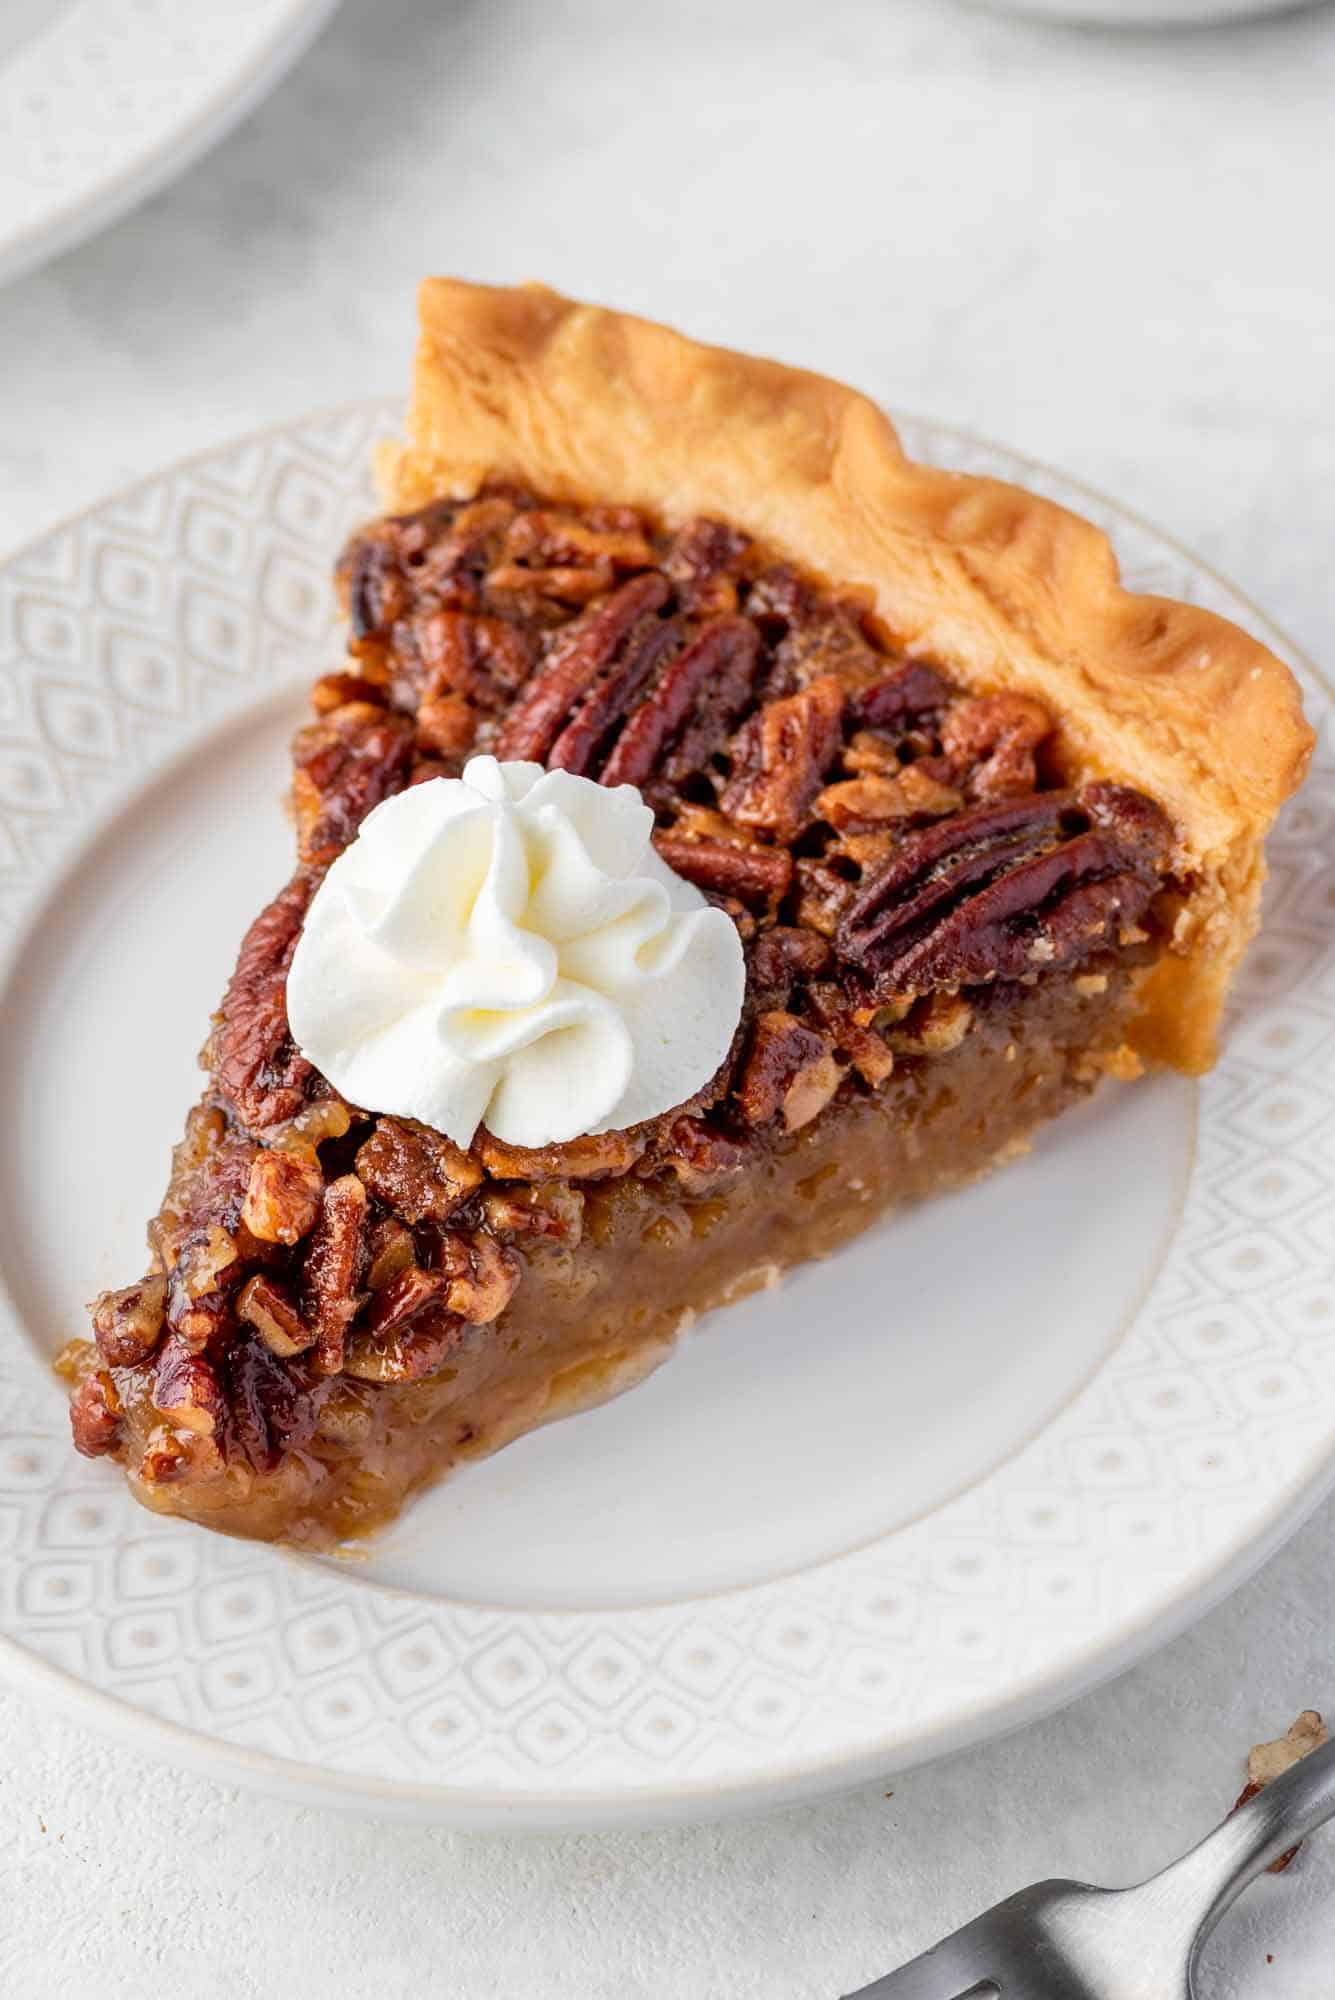 A slice of Pecan pie served on a white plate and topped with whipped cream.